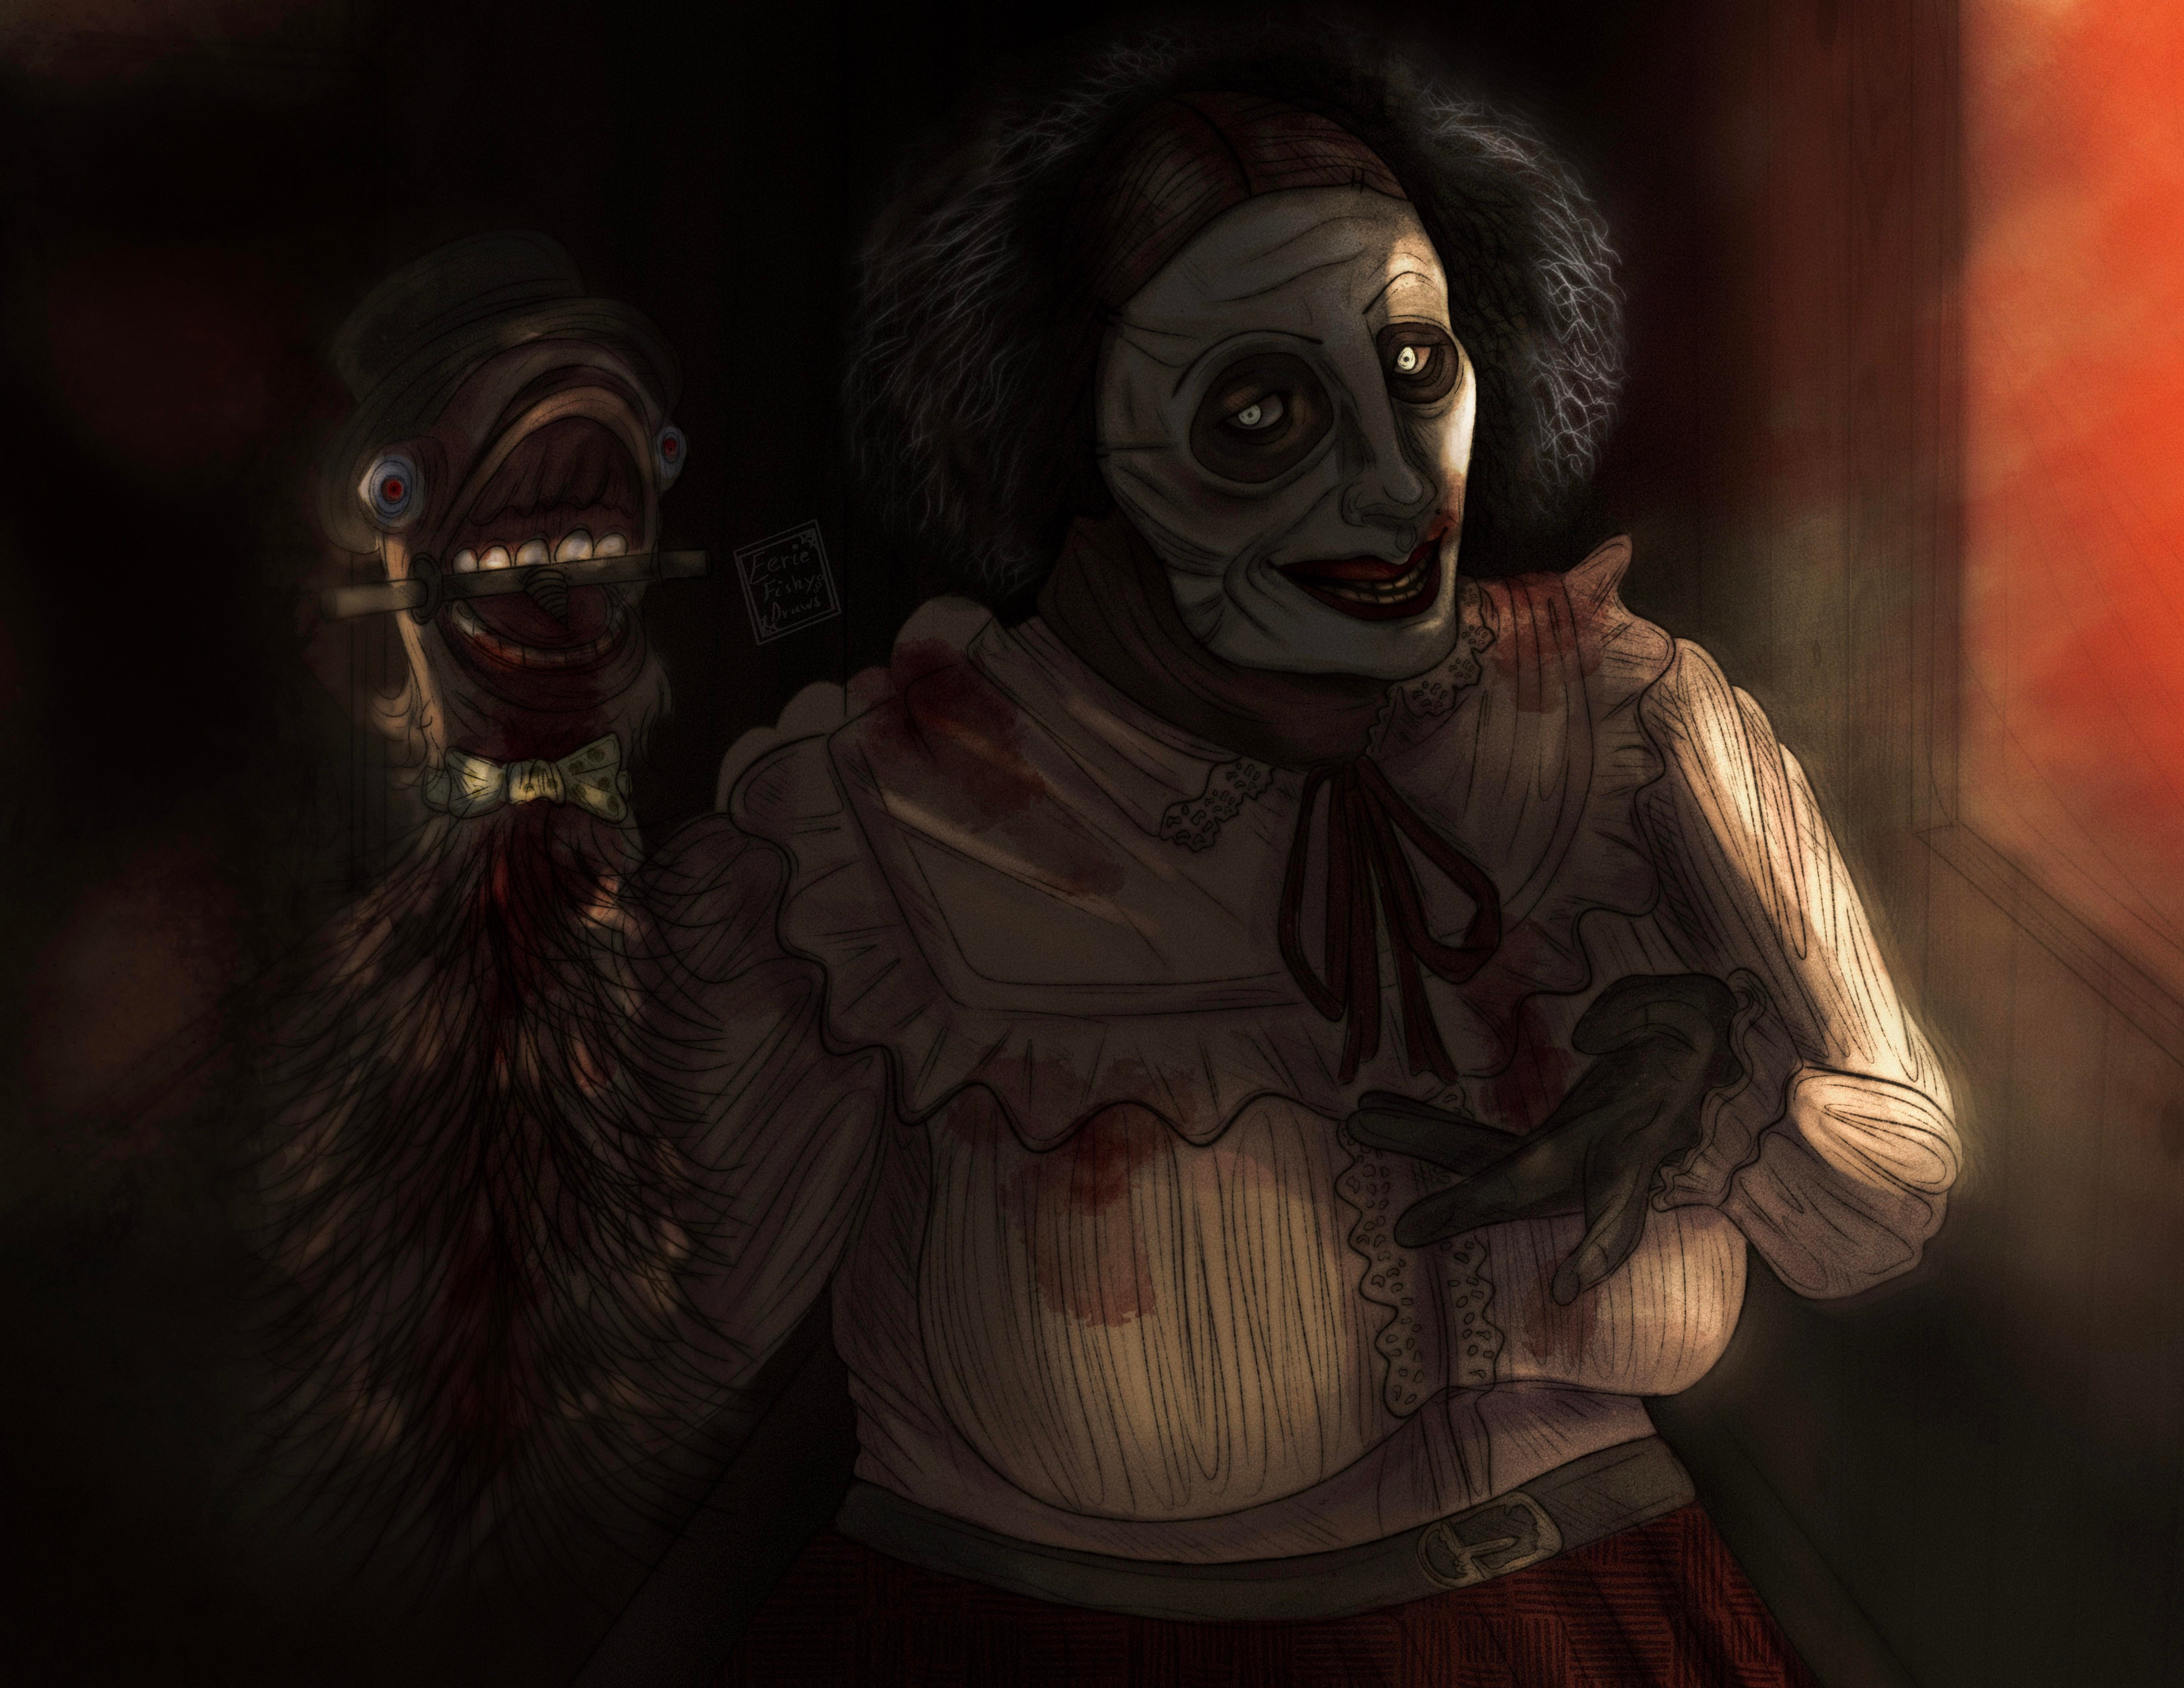 Drew Mother Gooseberry from the Outlast Trials, excited to see more of her!